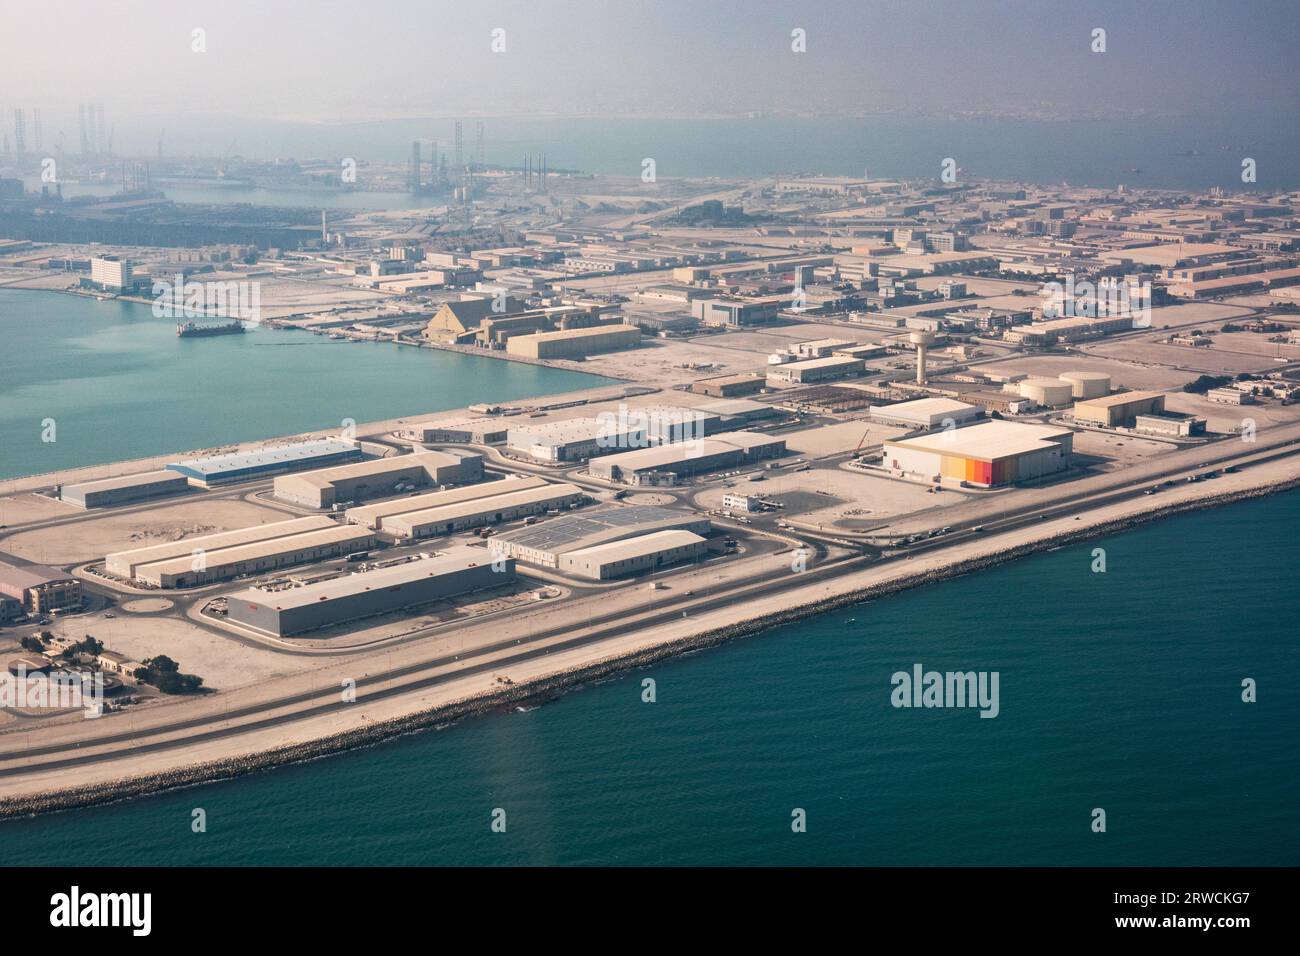 industrial warehouses and storage built on an artificial island in Bahrain Stock Photo